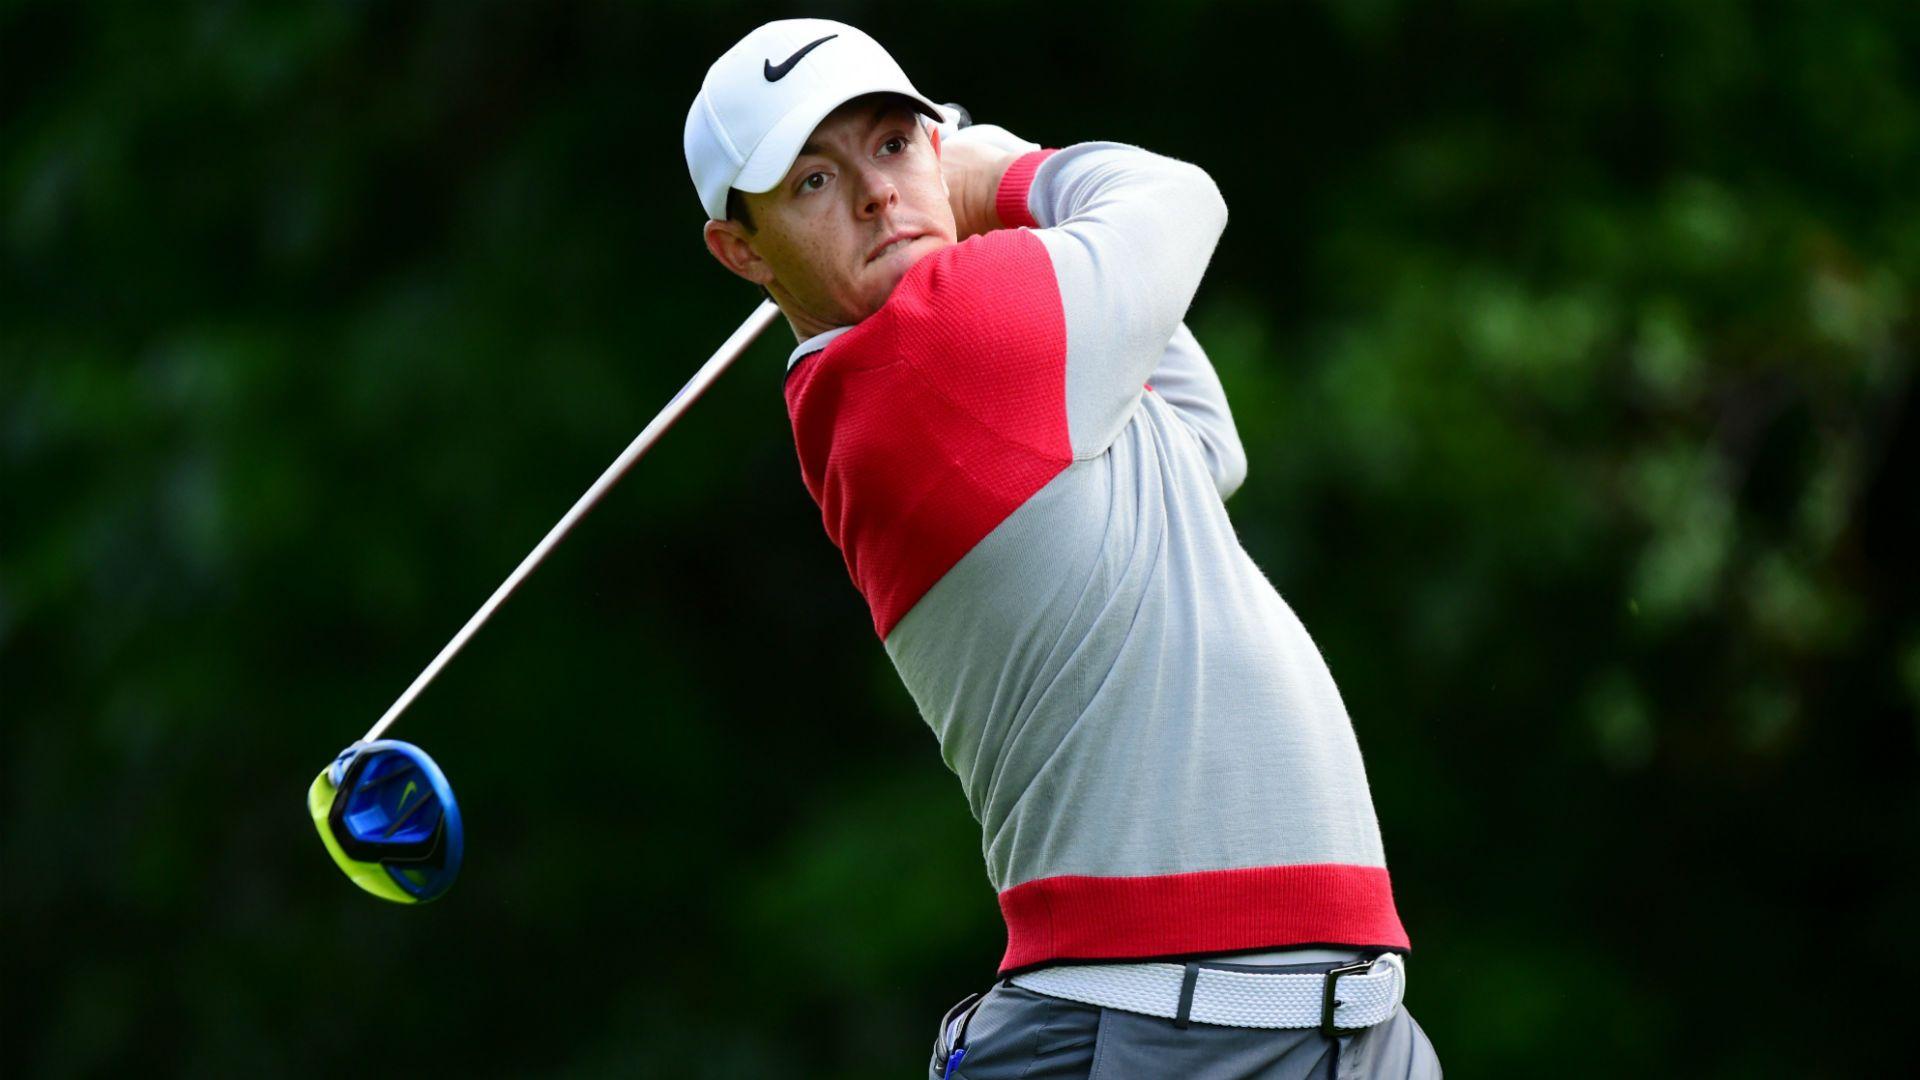 Even if Rory McIlroy had a vote, he's not sure he'd pick anyone